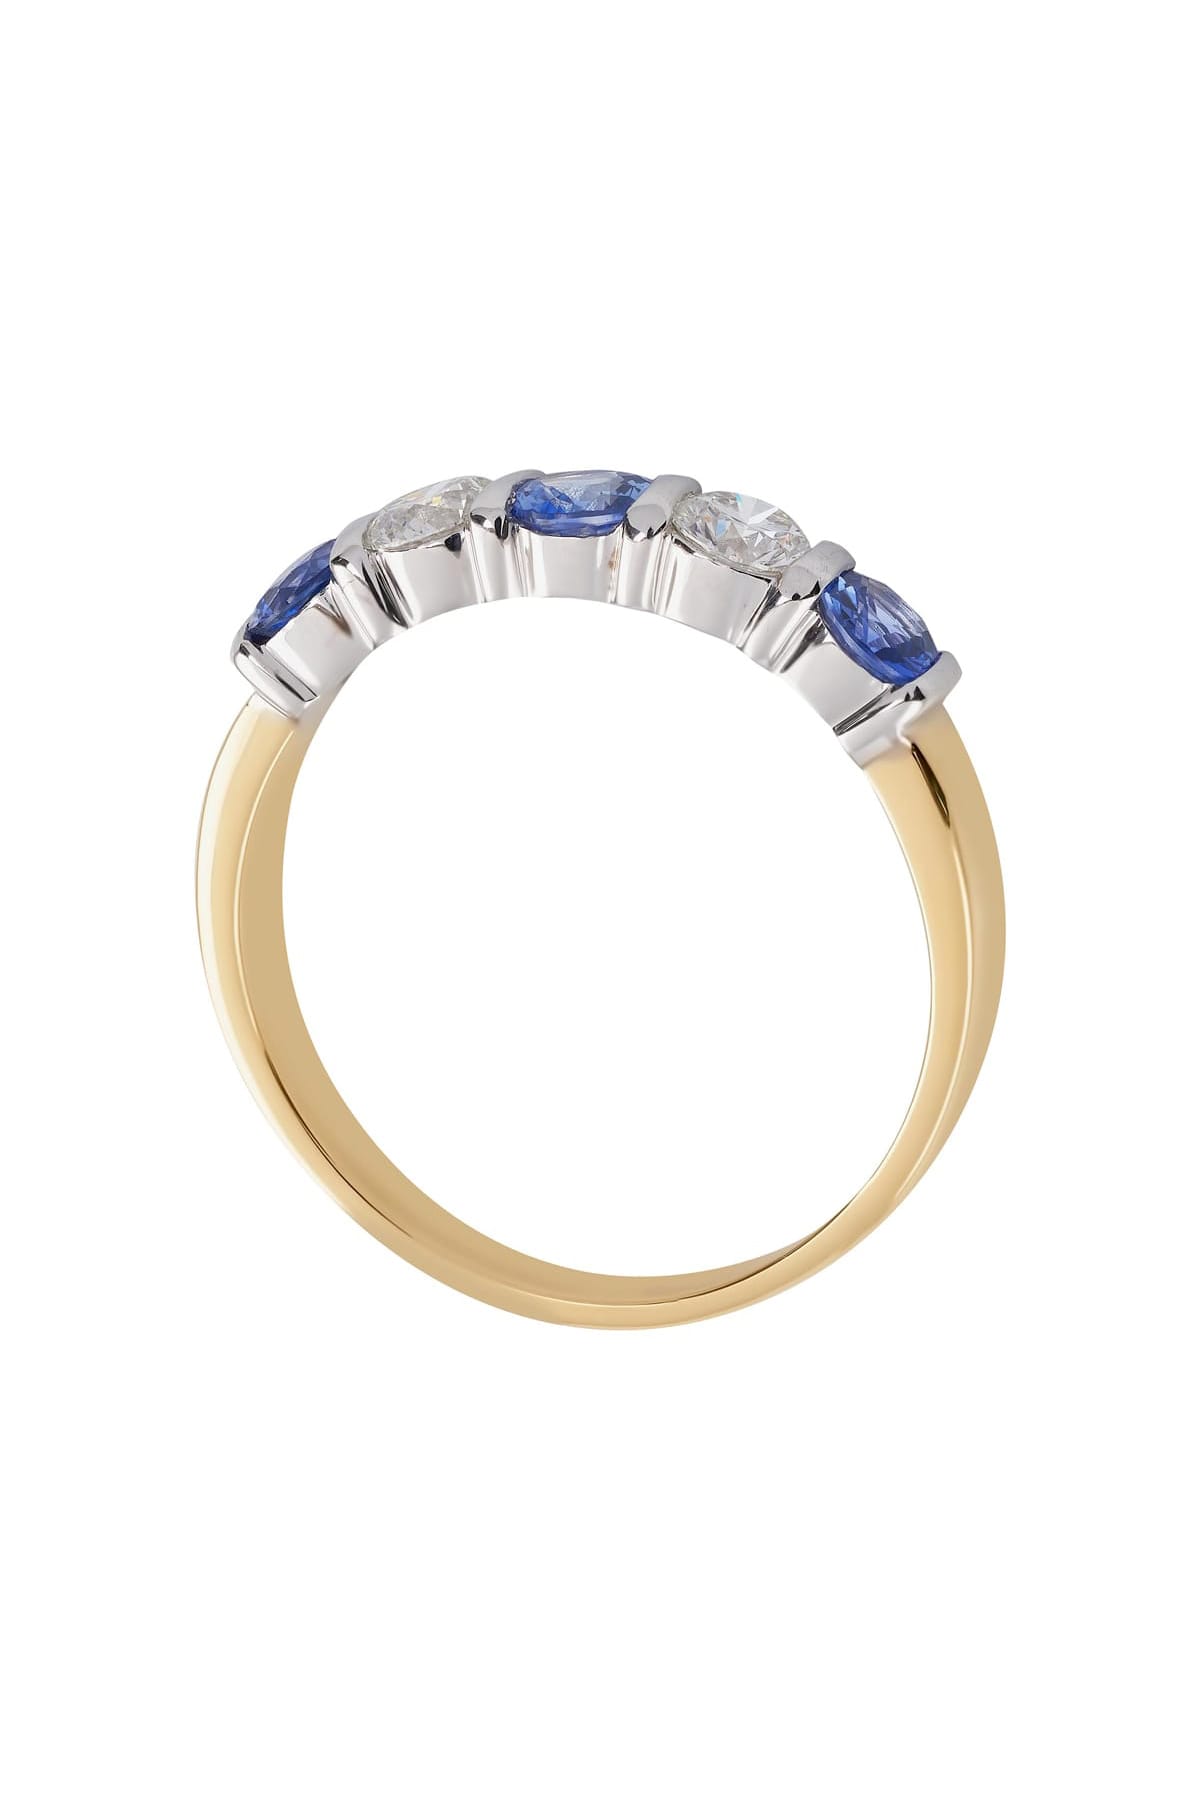 Ceylon Sapphire and Diamond Dress Ring set in 18ct Yellow and White gold available at LeGassick Diamonds and Jewellery Gold Coast, Australia.